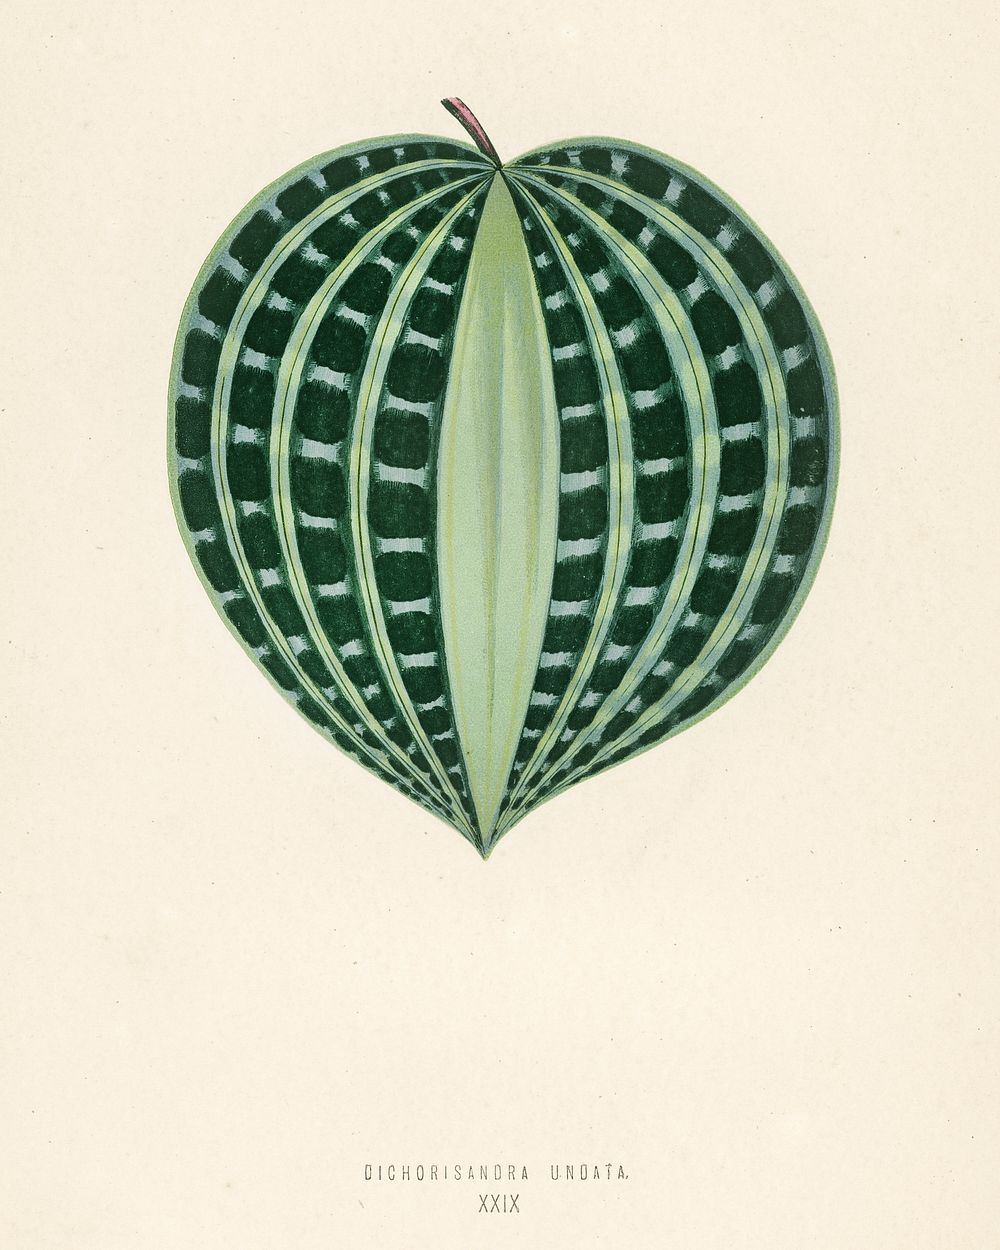 Seersucker Plant (Dichorisandra Undata). Digitally enhanced from our own 1929 edition of New and Rare Beautiful-Leaved…